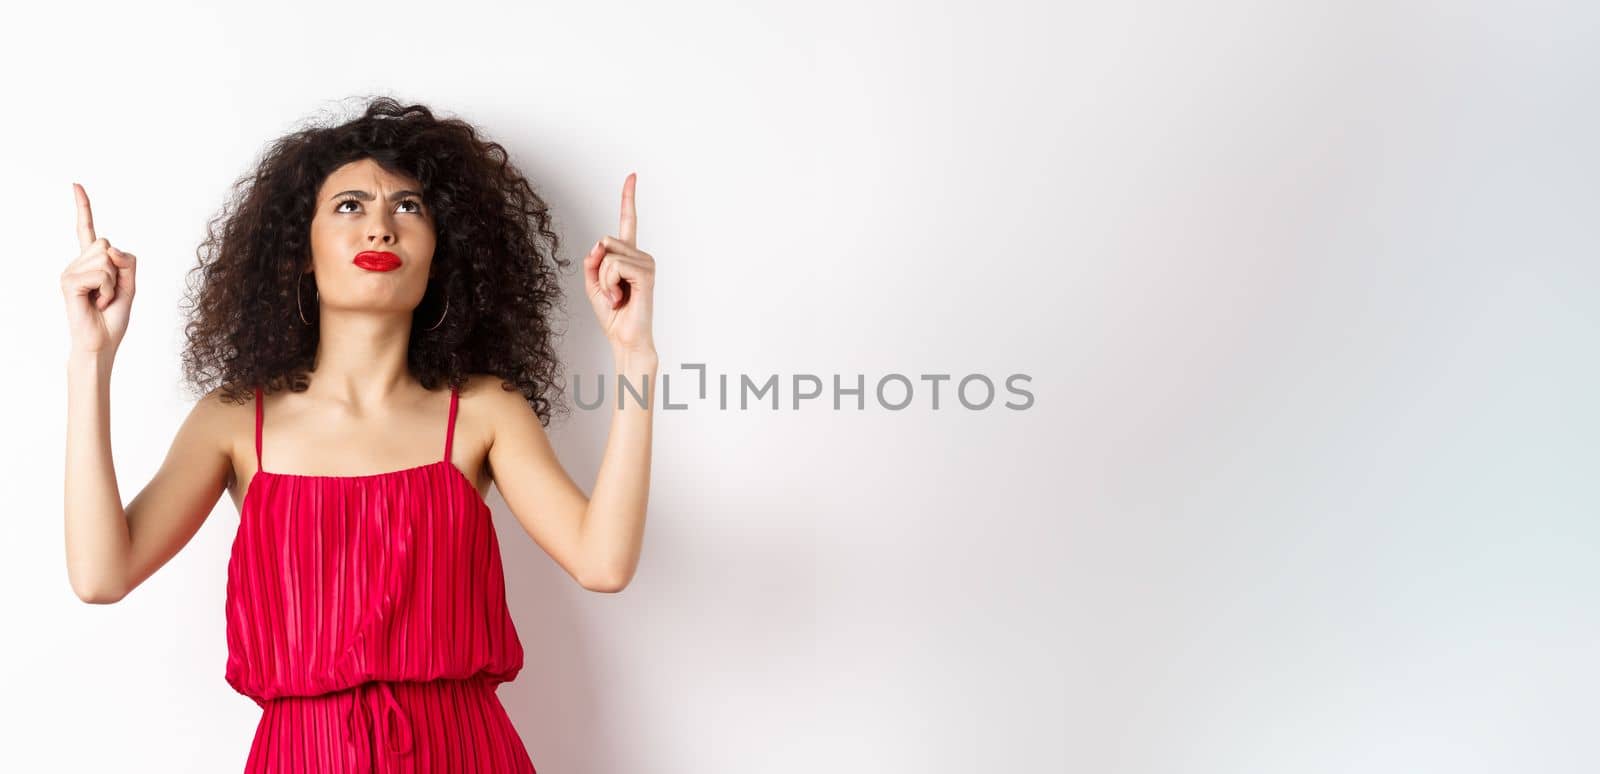 Angry and grumpy woman with curly hair, wearing red dress, frowning and looking up disappointed, standing over white background.